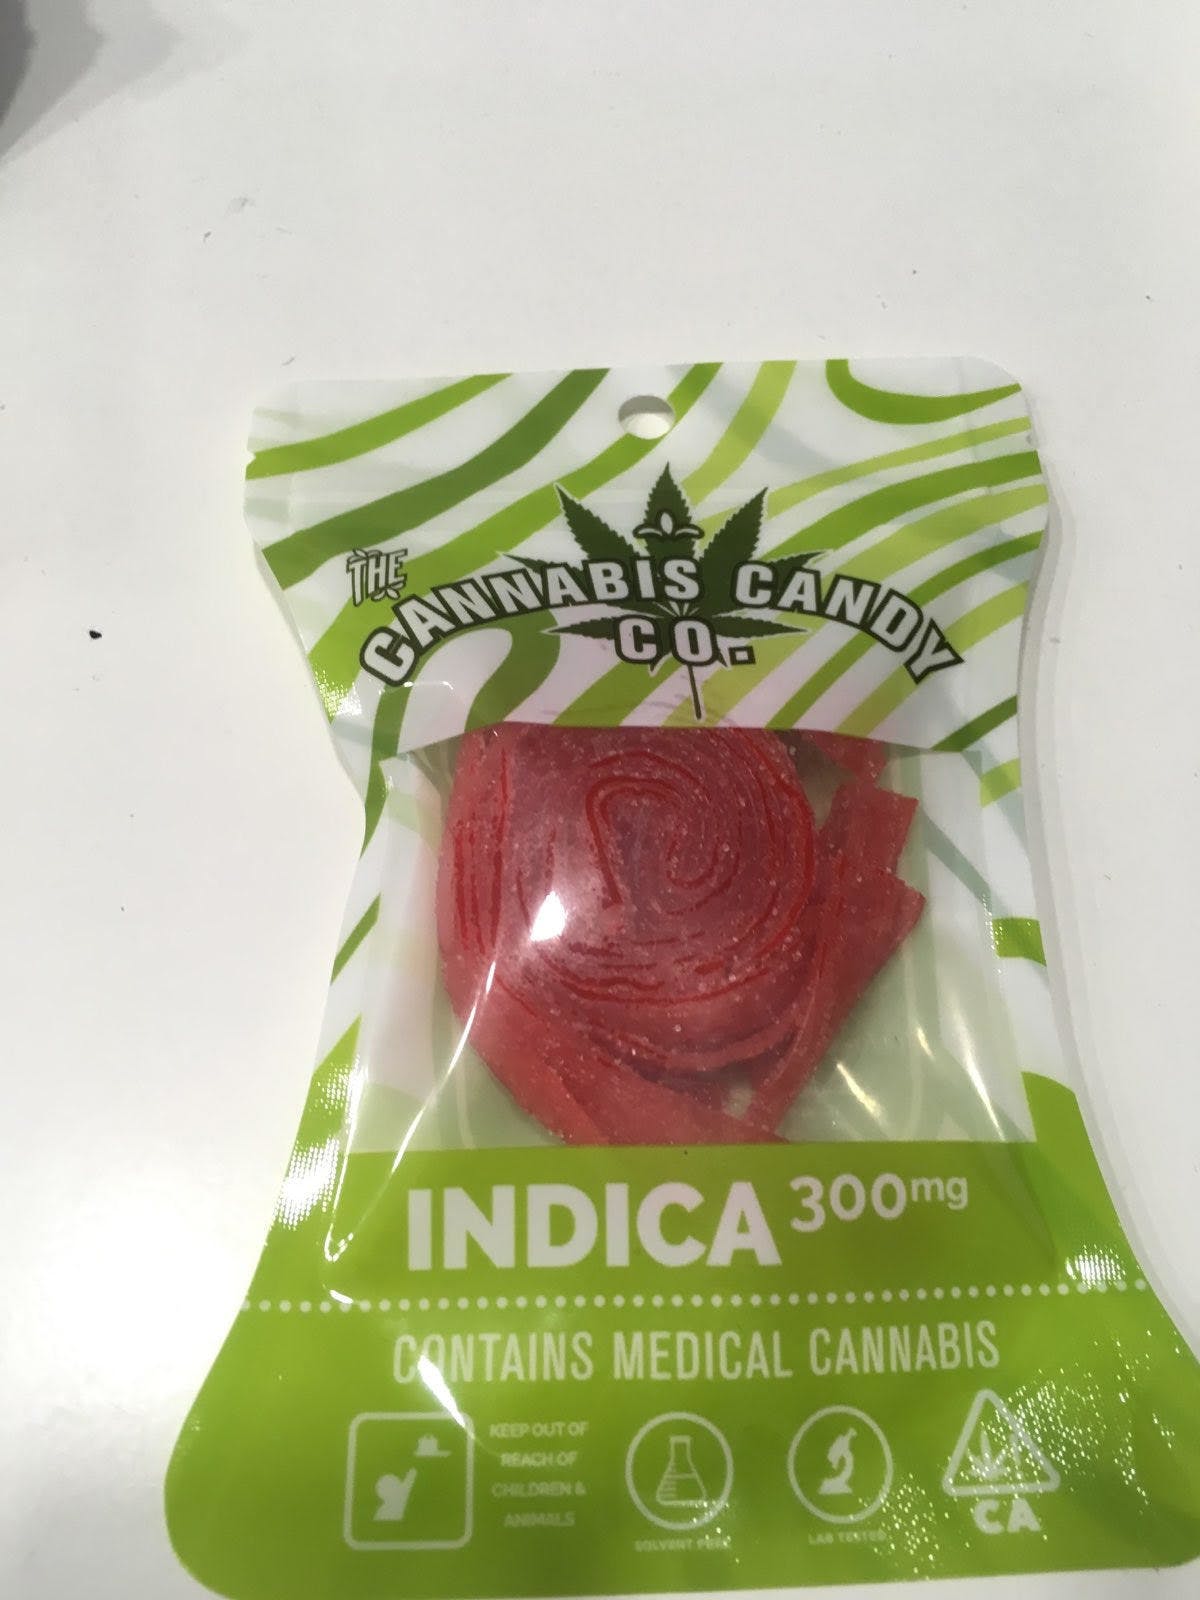 edible-cannabis-candy-co-300mg-2-for-25